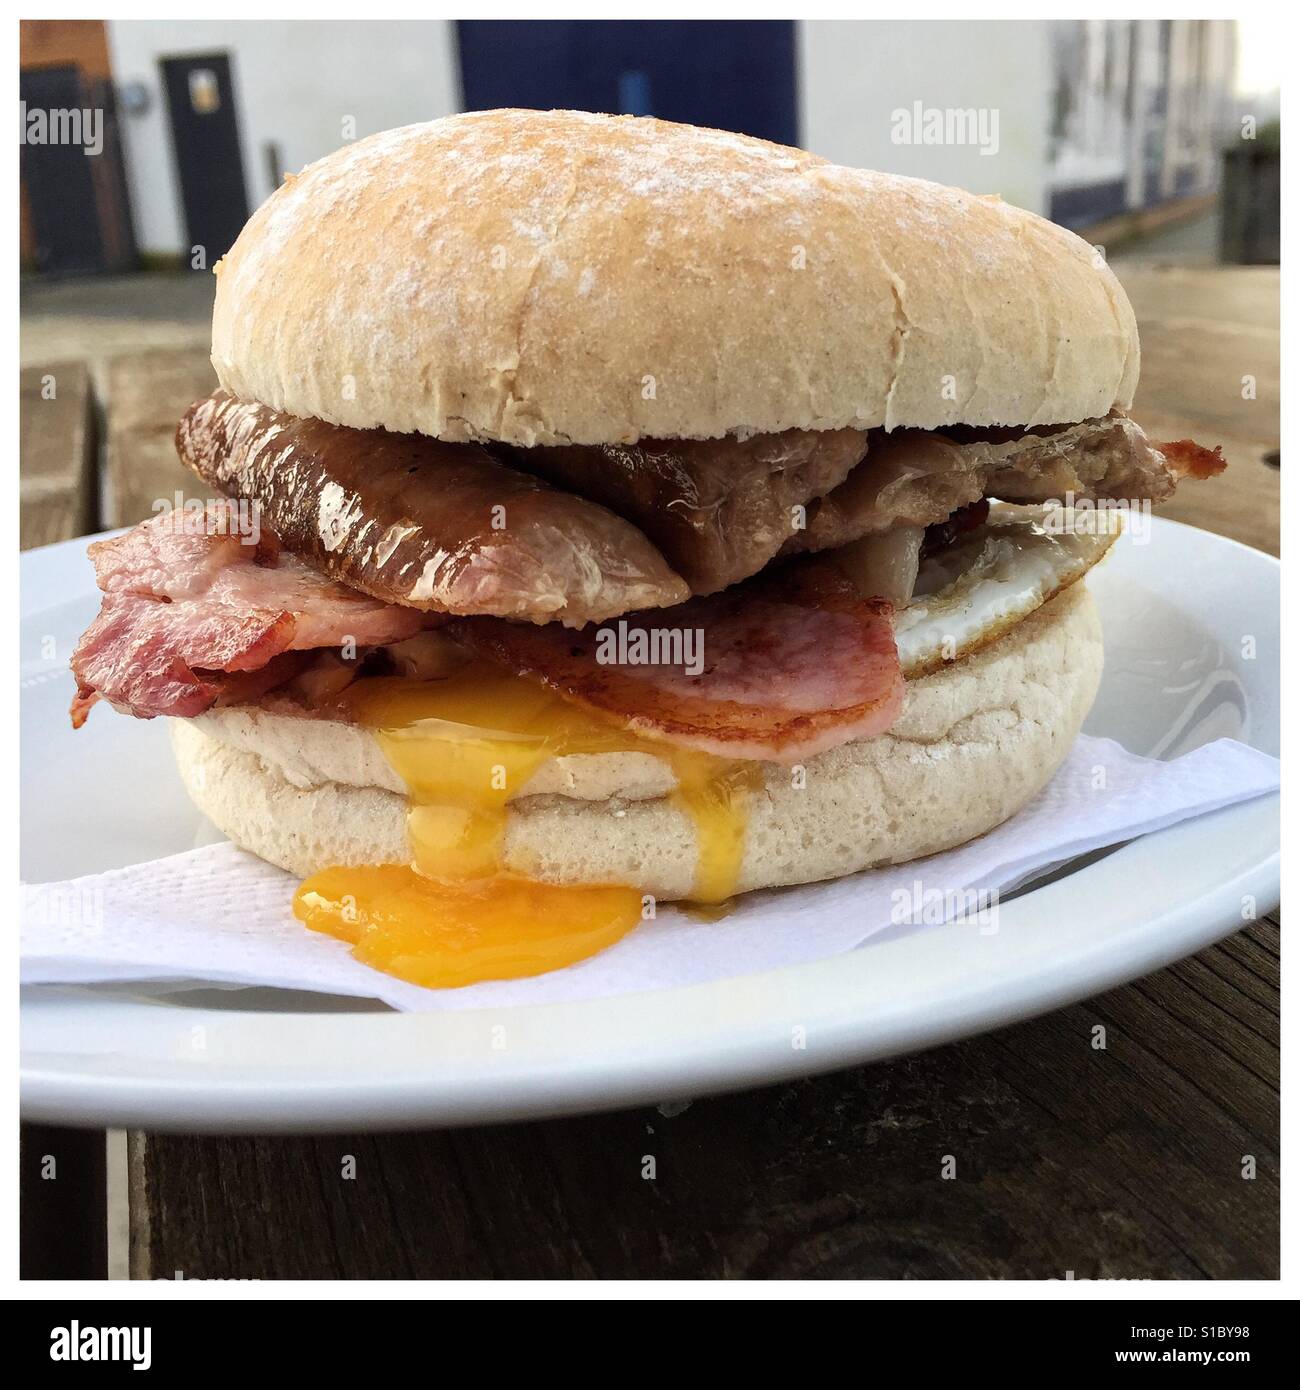 a-tasty-breakfast-baproll-from-an-outdoor-cafe-filled-with-bacon-sausage-S1BY98.jpg